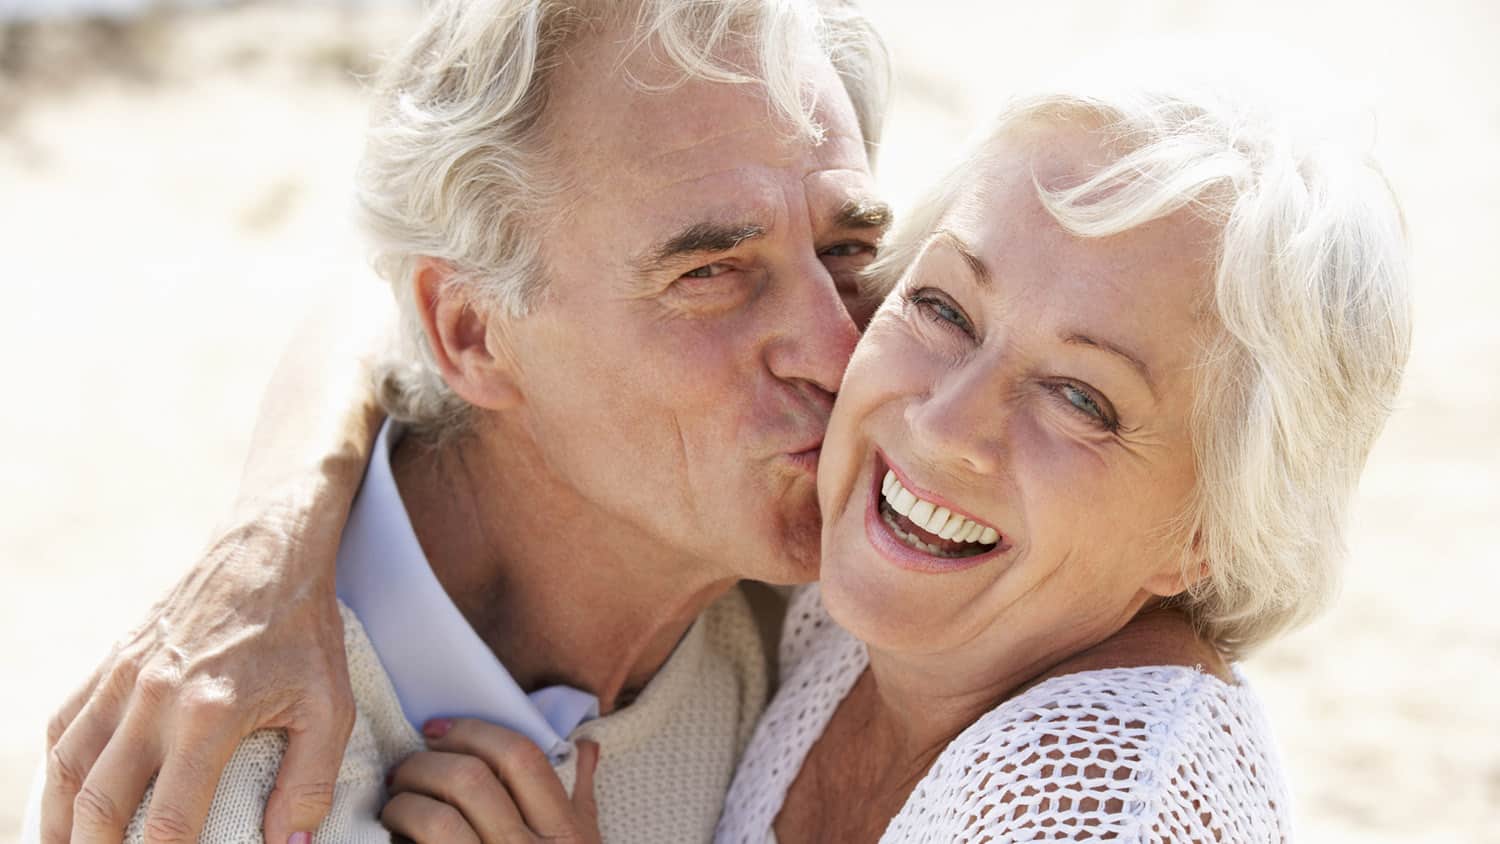 Dating Over 60: To Live Together or Not Together, That is the Question |  Sixty and Me